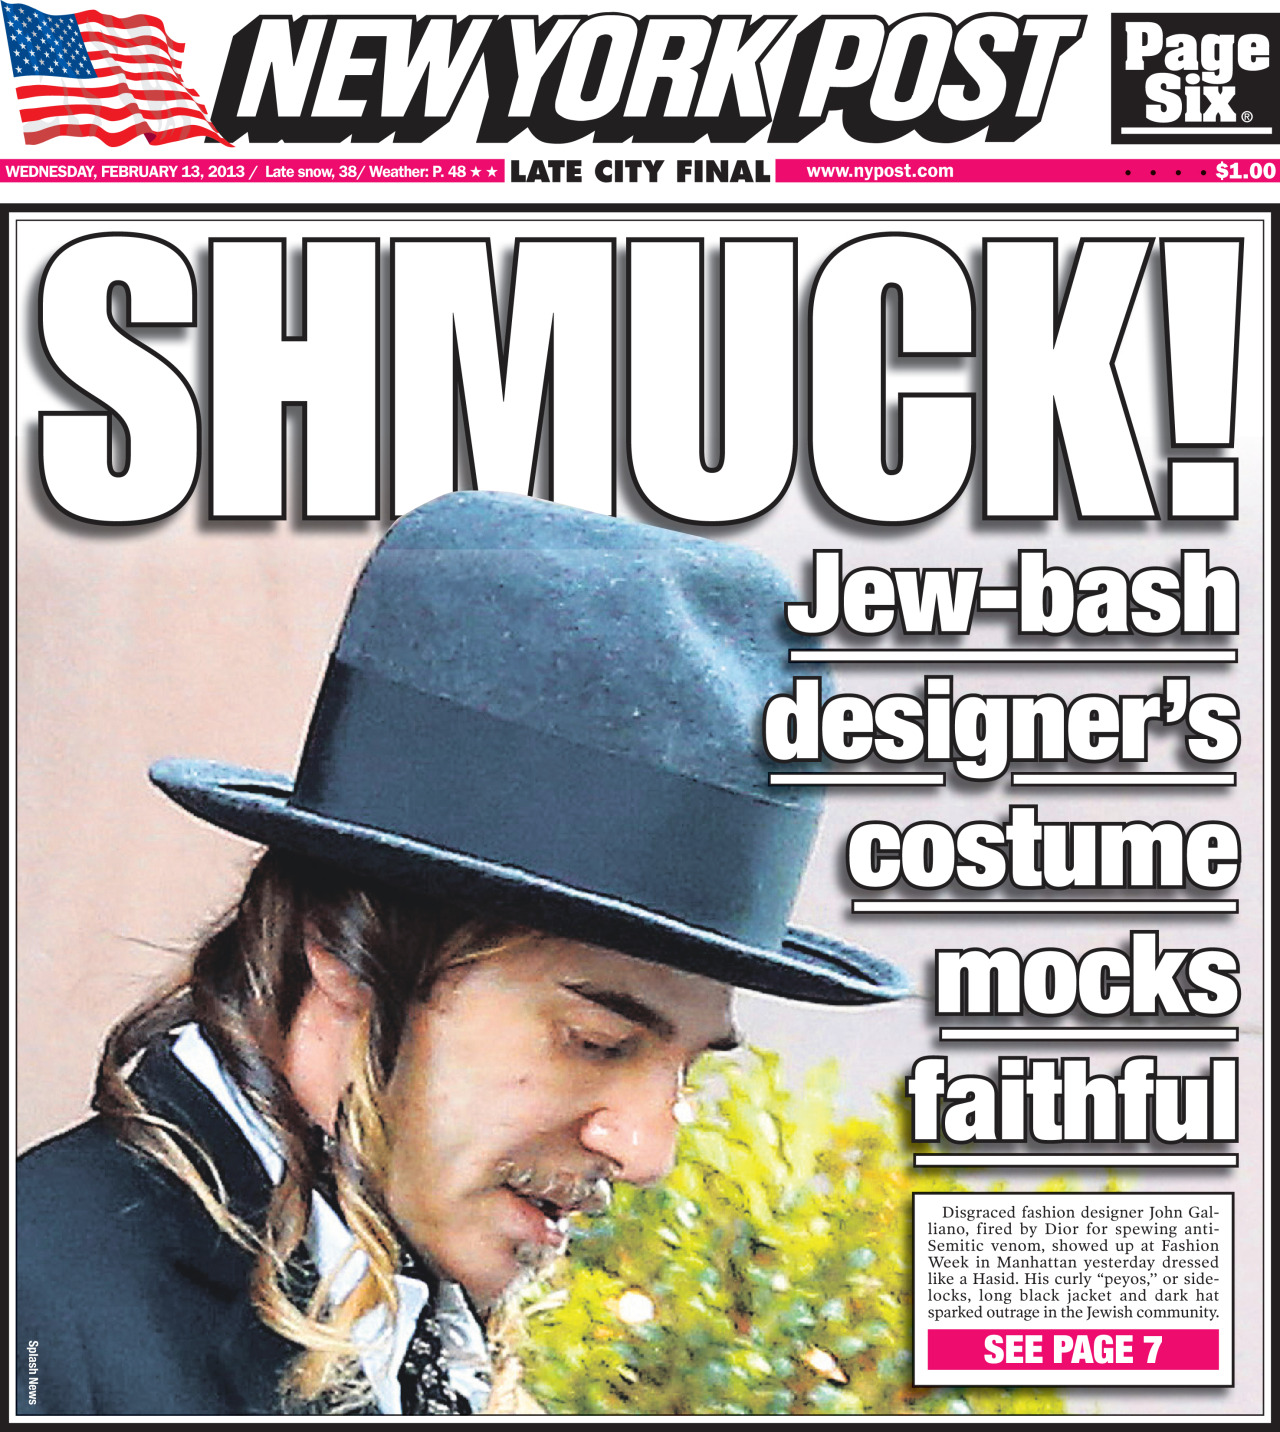 The Ny Post Front Page